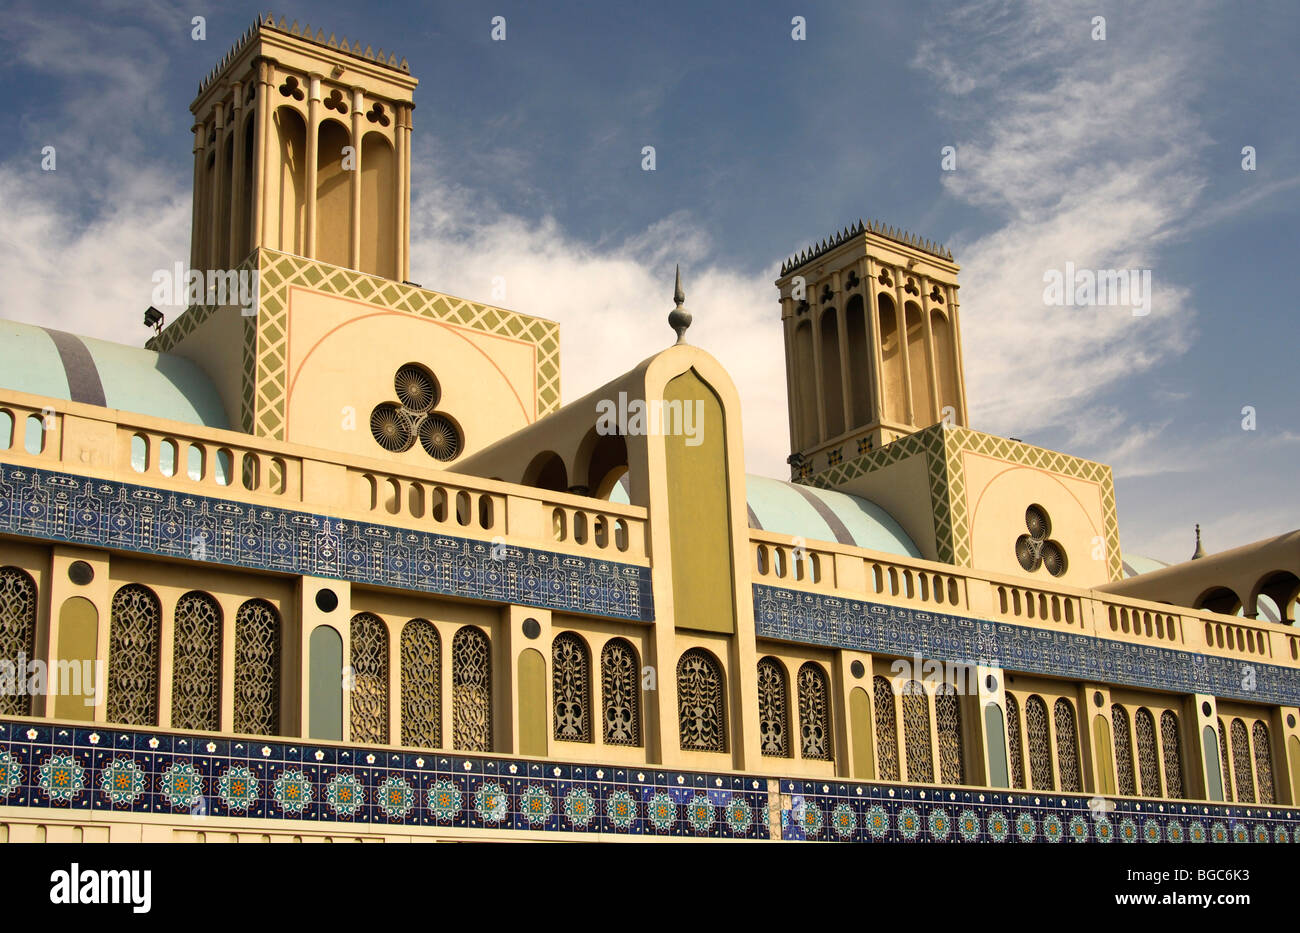 Building with wind towers, central market Souq al-Markazi, the Blue Souk, Sharjah, the Emirate of Sharjah, United Arab Emirates Stock Photo